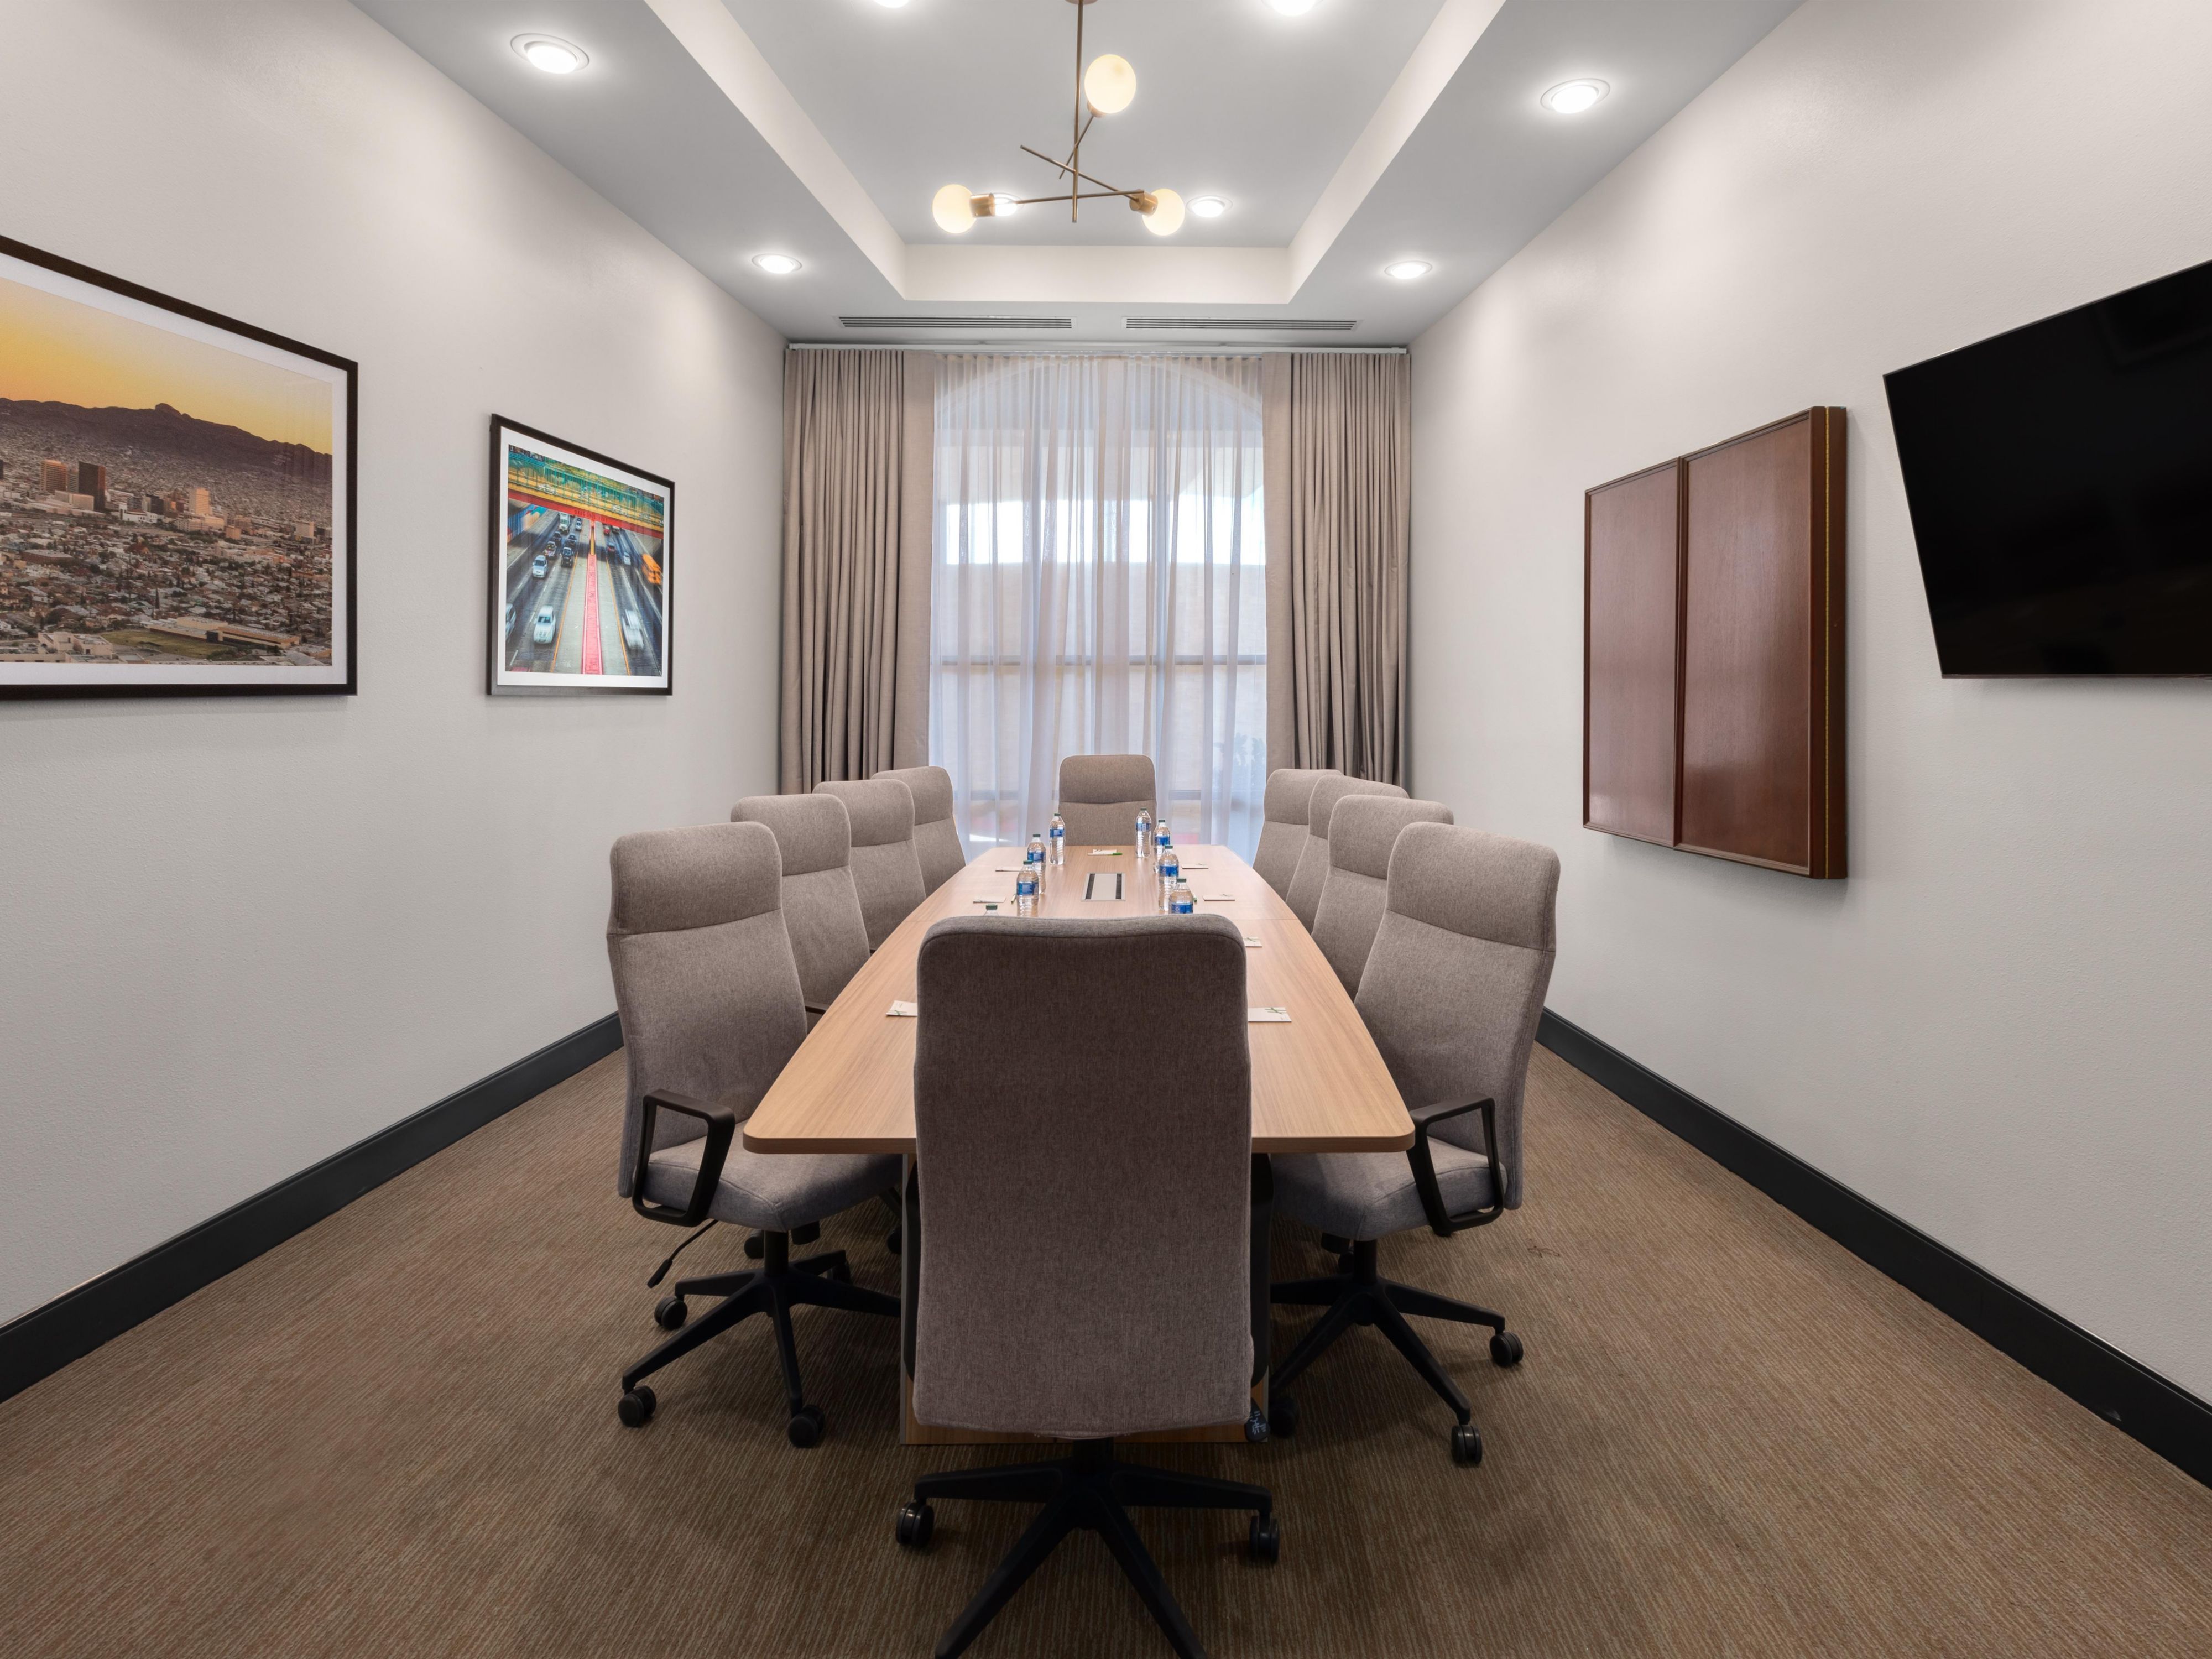 Our Executive Boardroom is a favorite for intimate corporate meetings or company interviews, with complimentary wireless internet, water station, and seating for up to 10 attendees. Audio/Visual equipment, meals, and beverages are all available. For pricing and availability, contact  Sales at alexandro.lazos@aimbridge.com